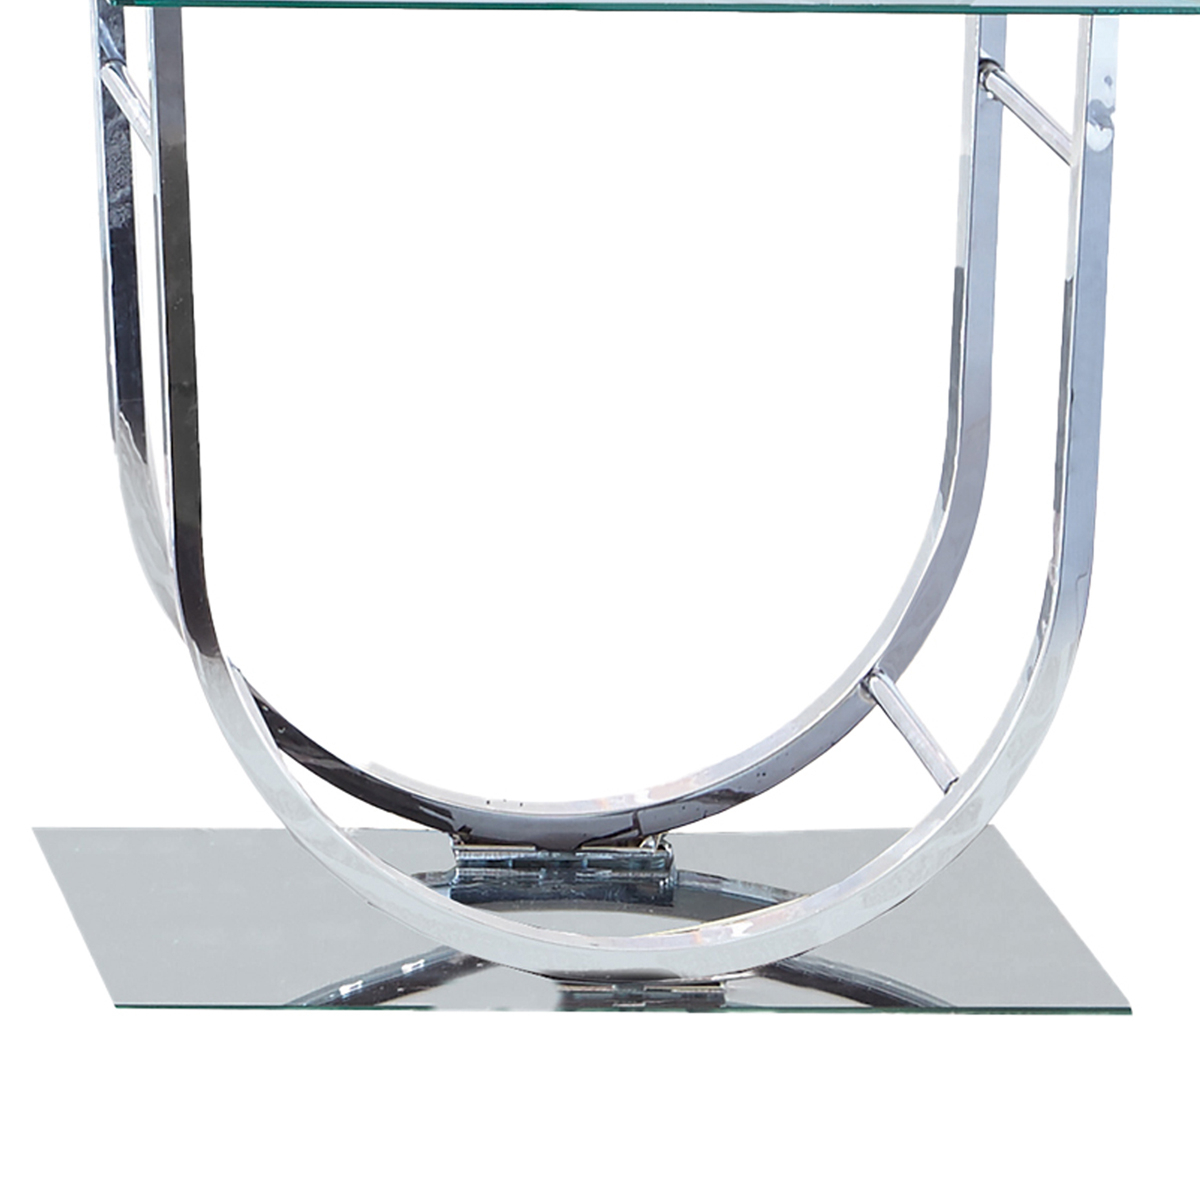 Tempered Glass Top End Table With U Shape Metal Frame, Chrome And Clear- Saltoro Sherpi